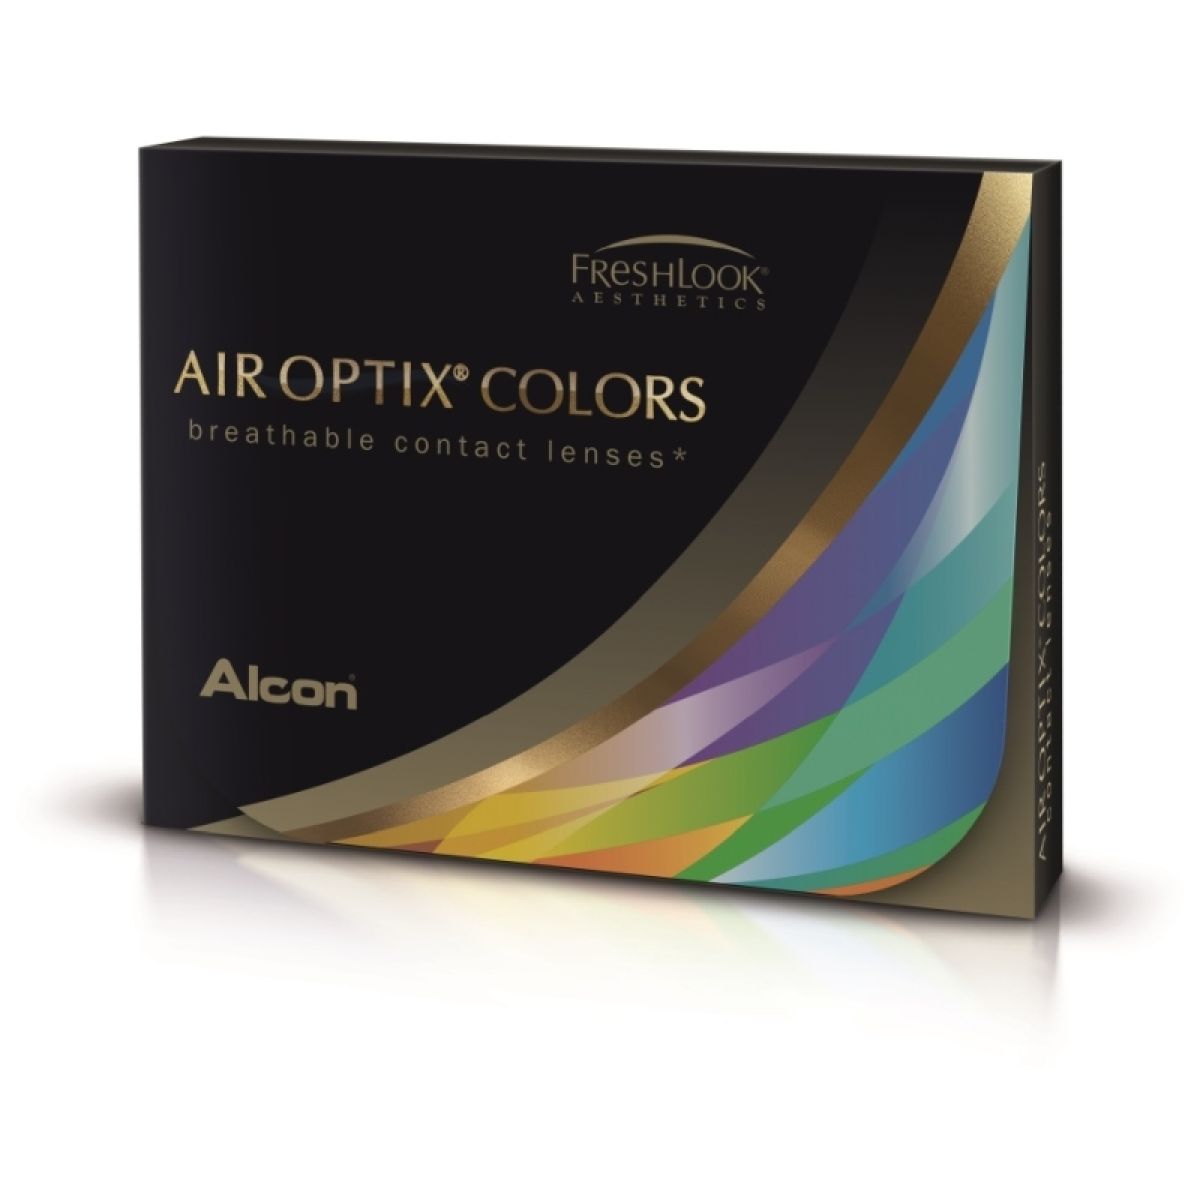 AIR OPTIX COLORS MONTHLY DISPOSABLE COLORED CONTACT LENSES (2 LENSES)